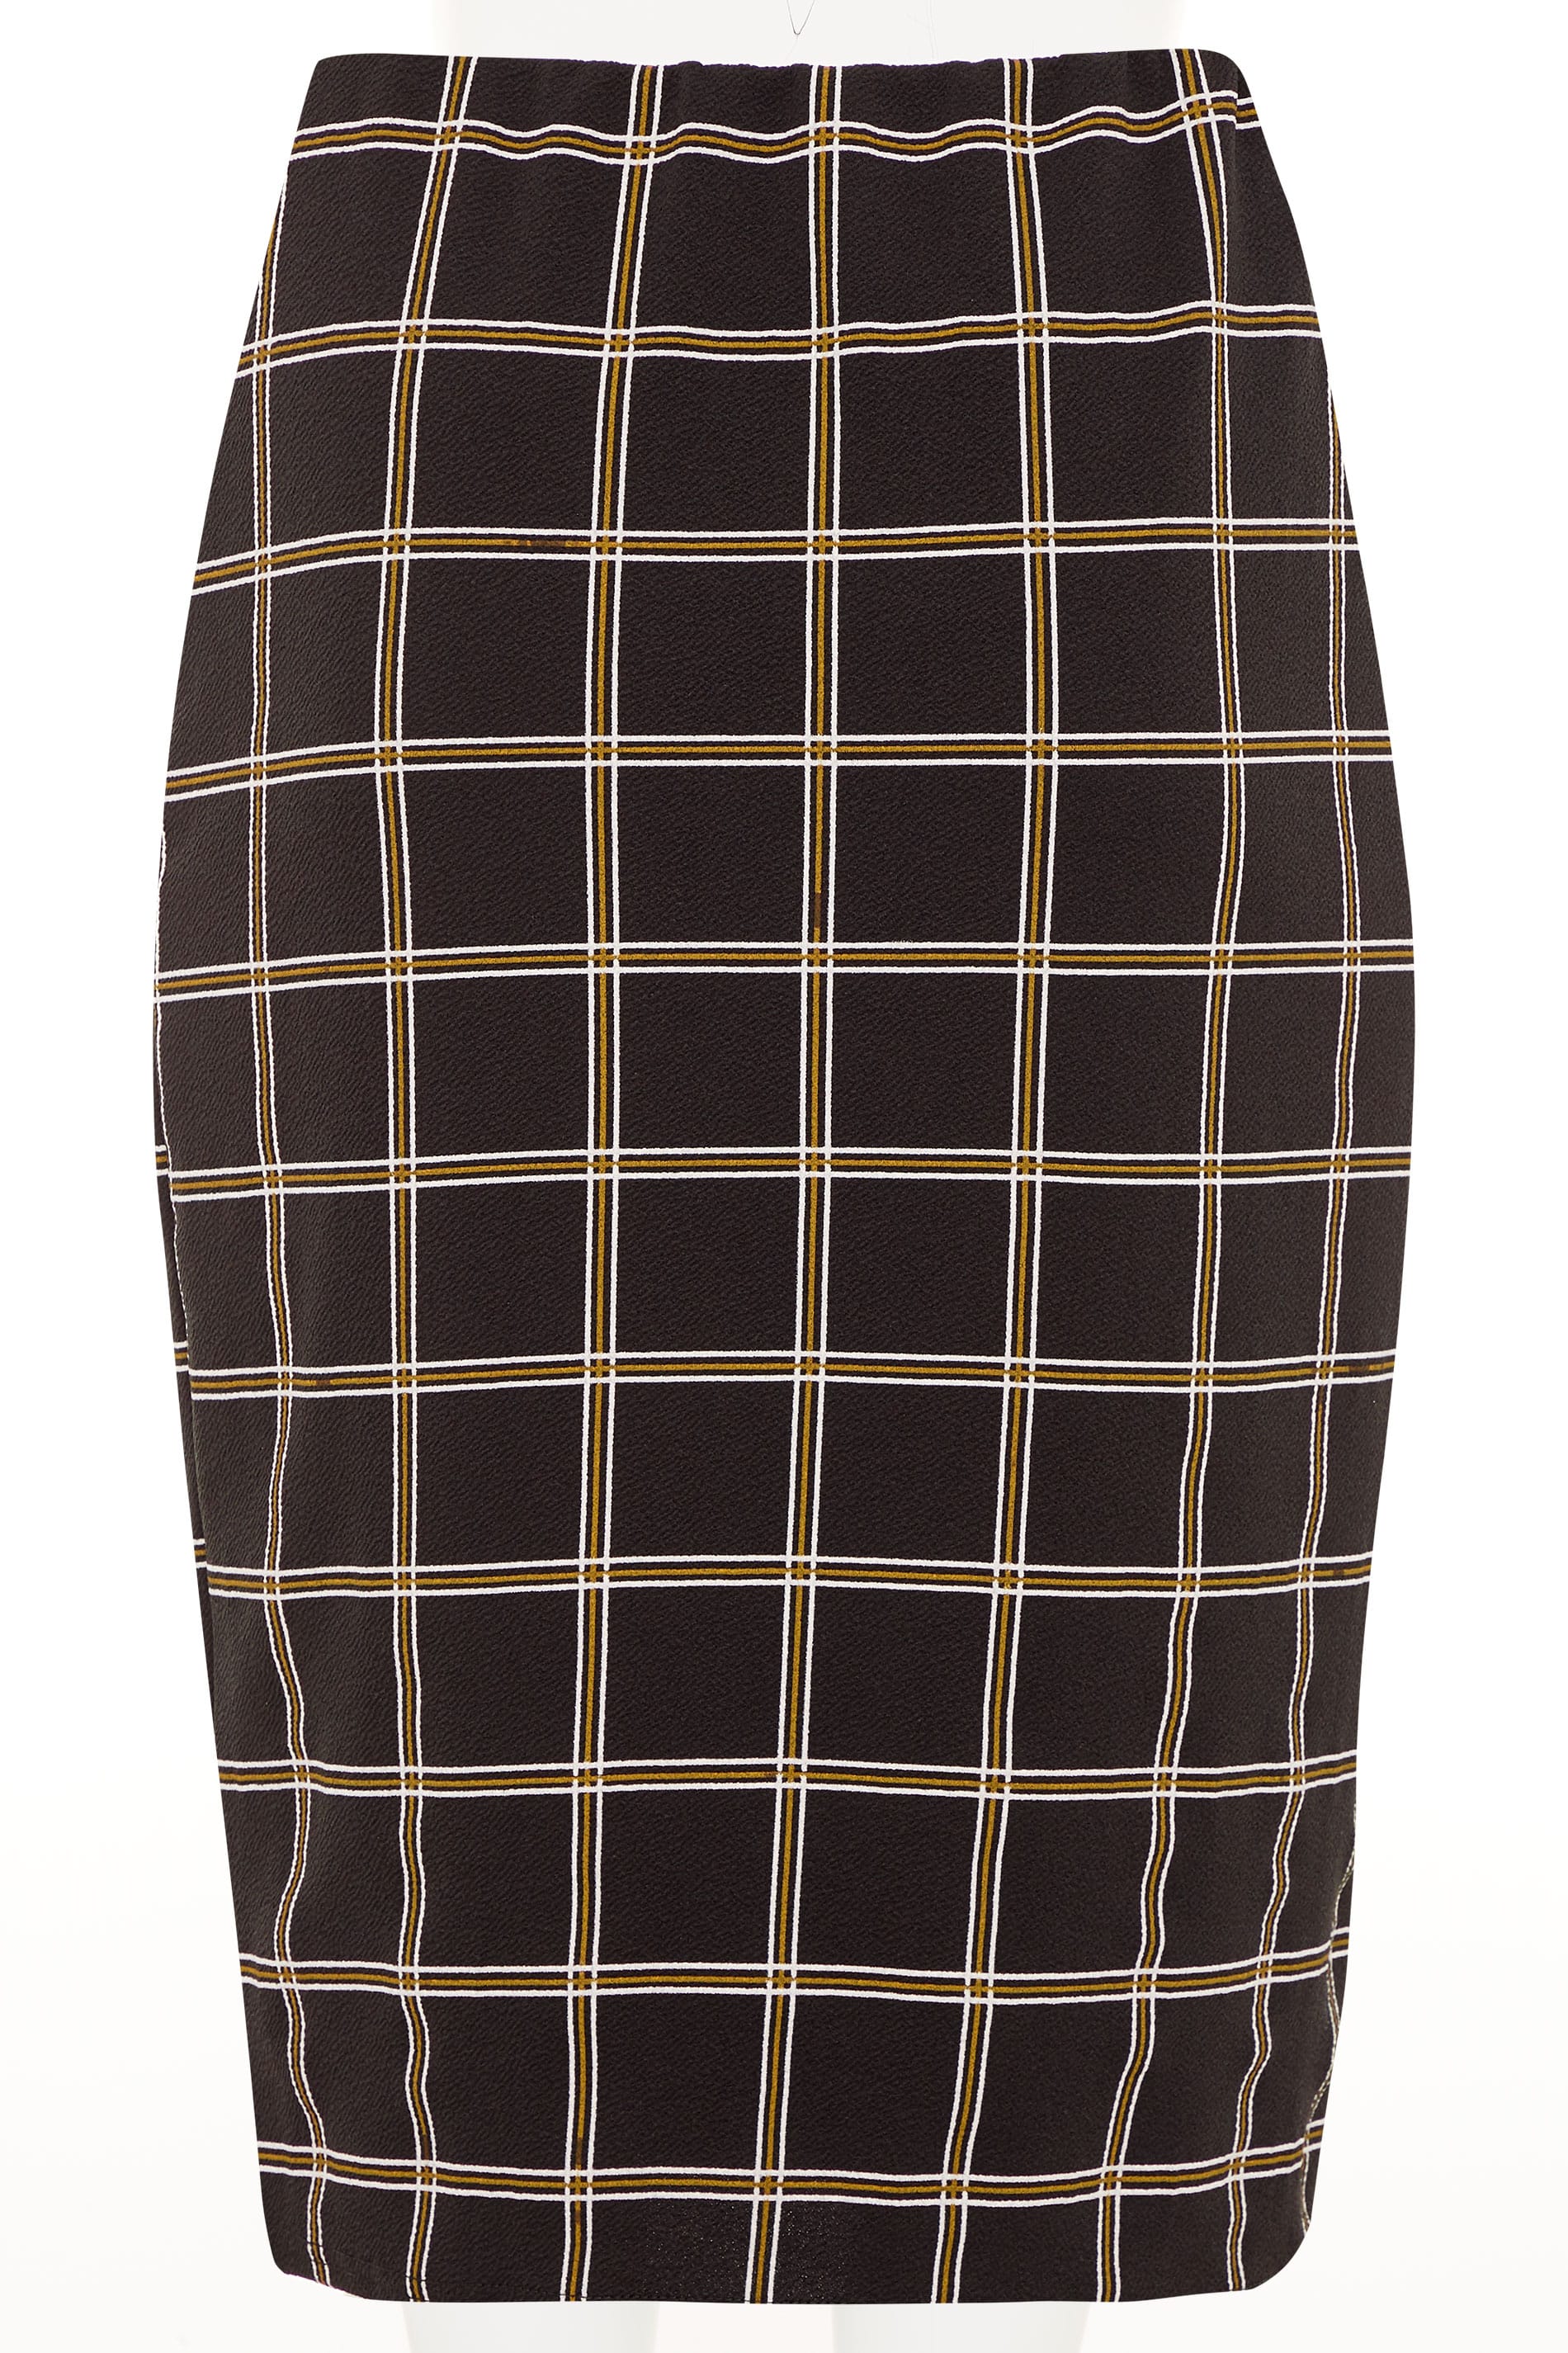 Black & Mustard Yellow Check Pencil Skirt | Yours Clothing